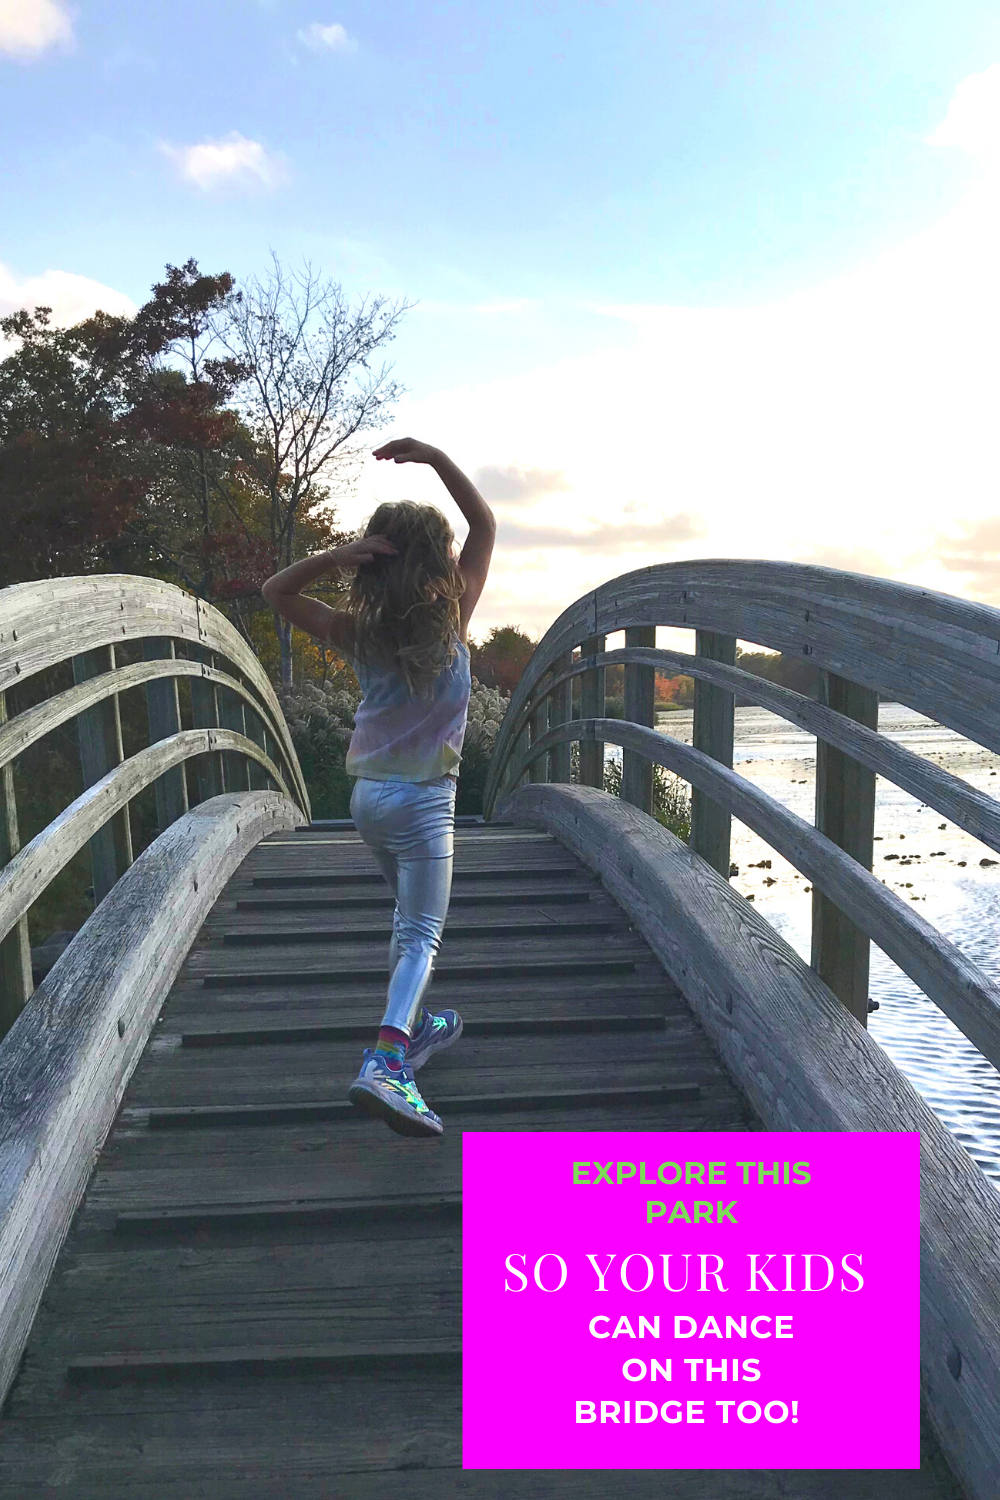 This bridge on this day made us all want to dance at Ryan Park in North Kingstown, RI